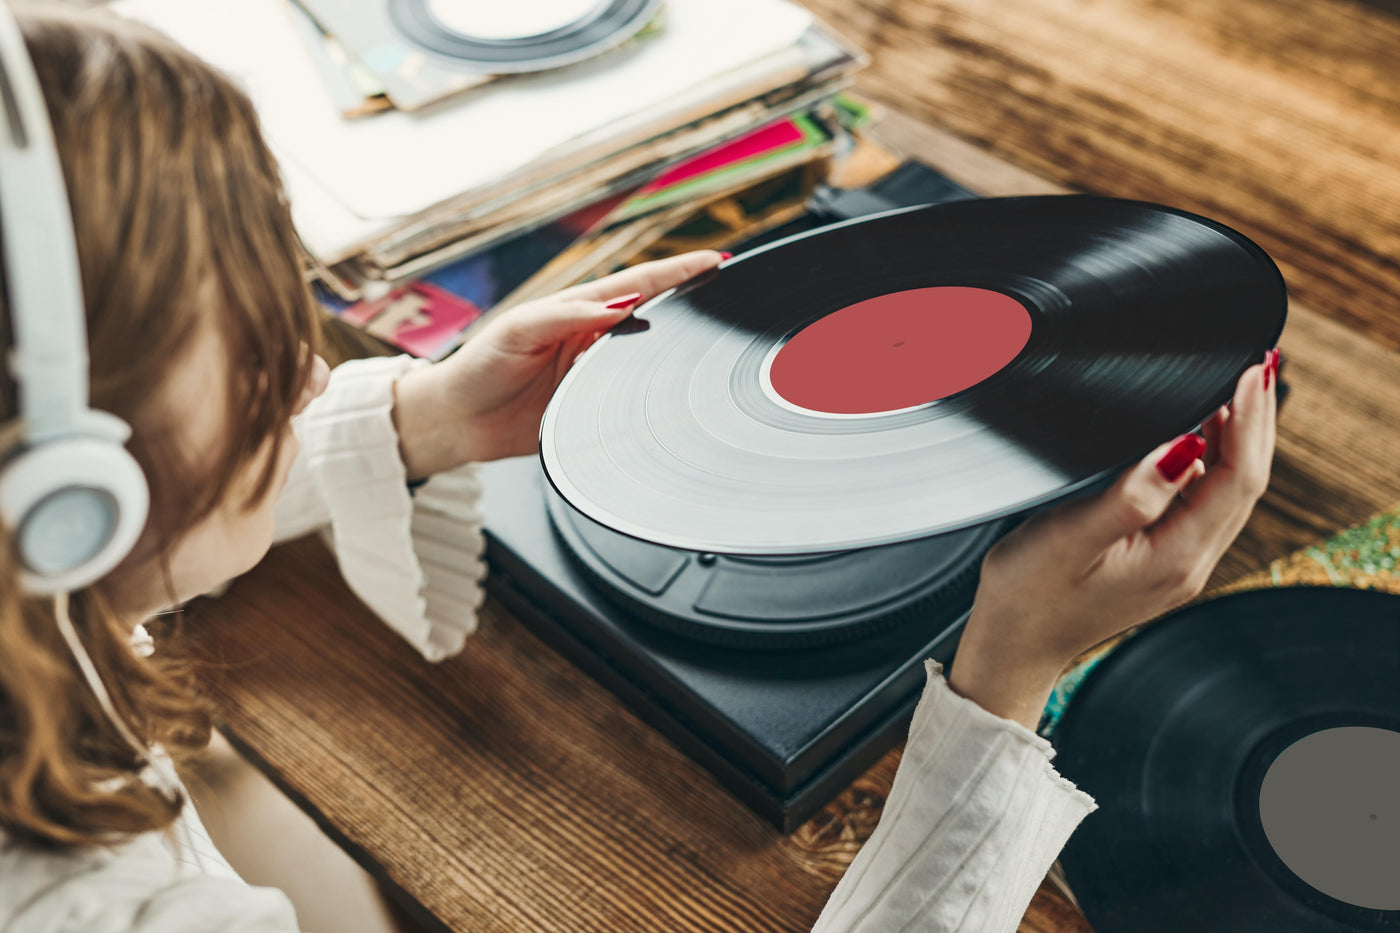 How to Clean Vinyl Records: Tips and Tricks From The Pros